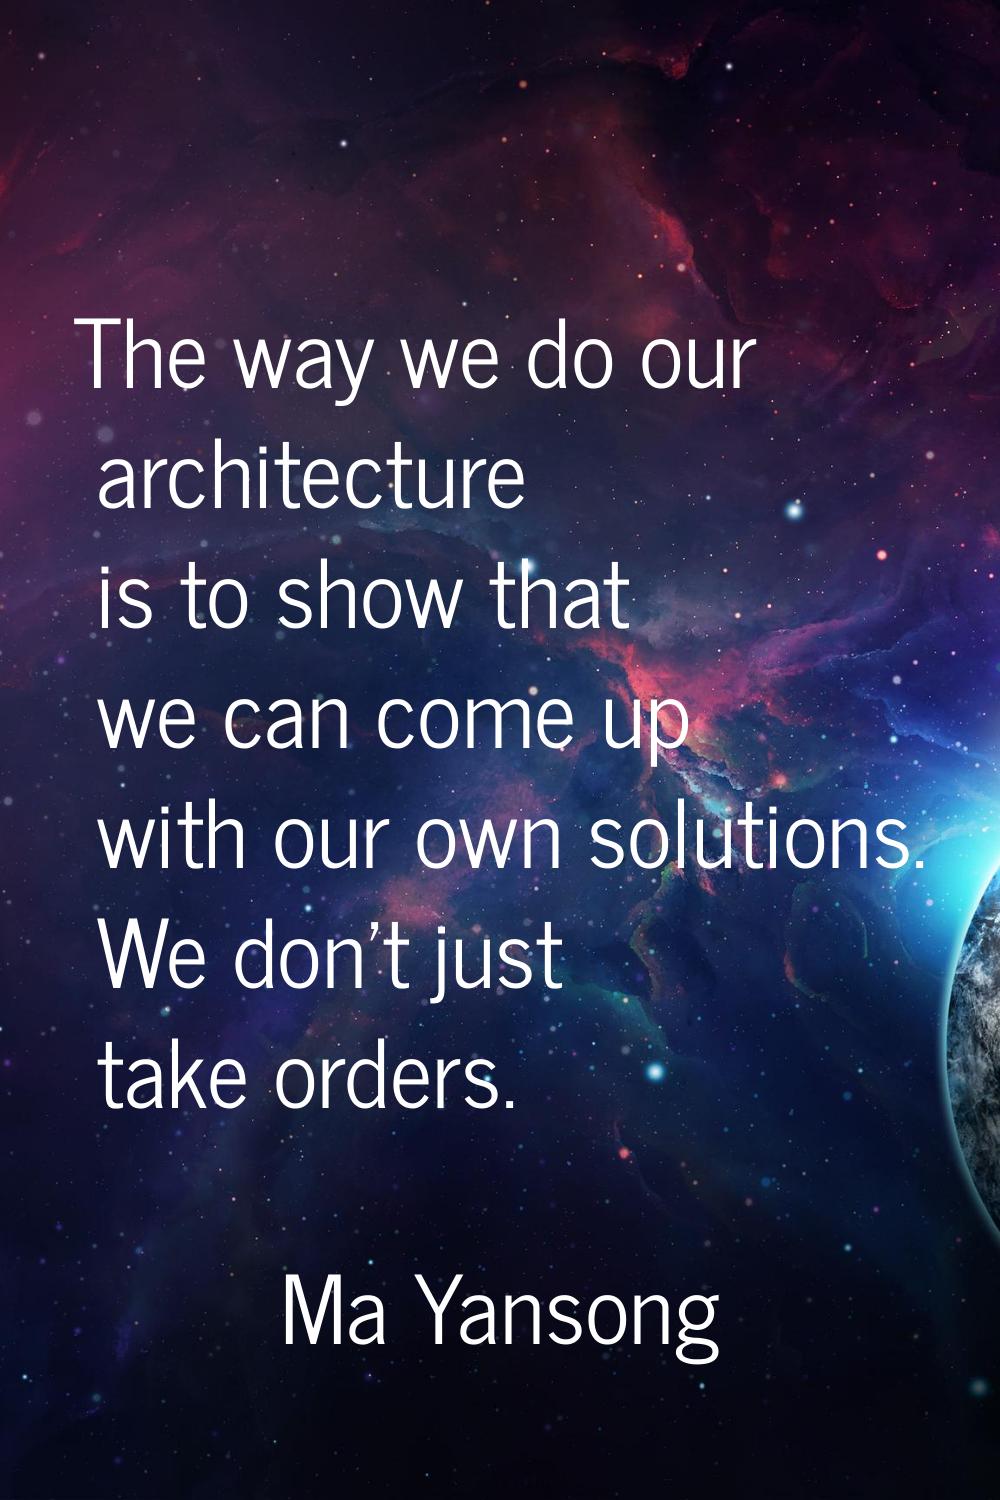 The way we do our architecture is to show that we can come up with our own solutions. We don't just